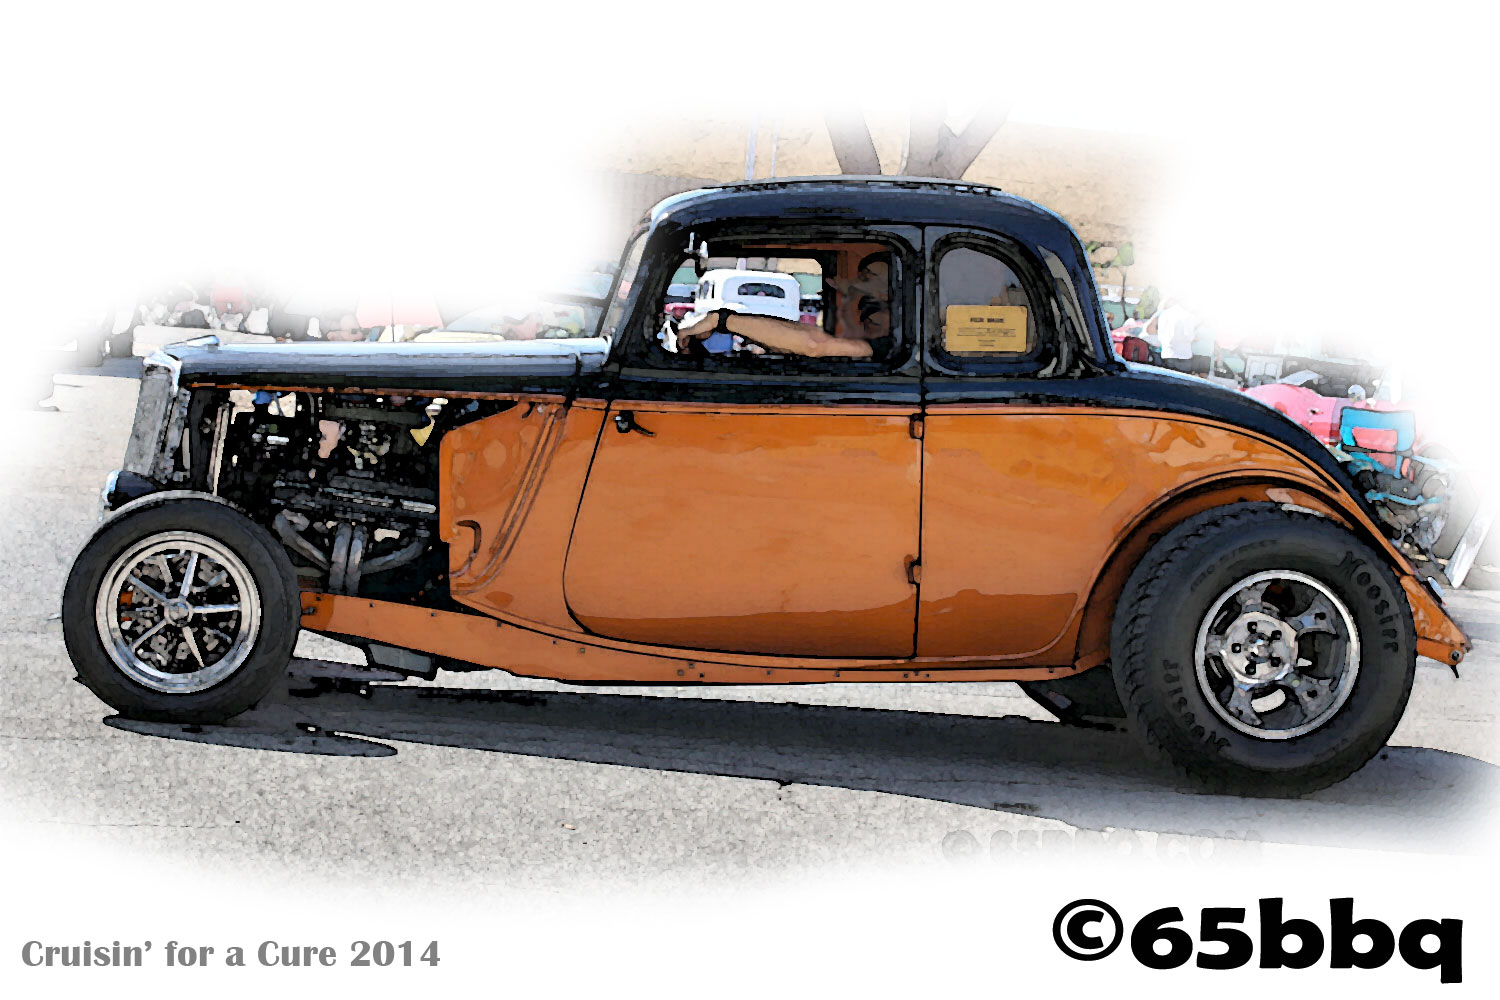 cruisin-for-a-cure-2014-the-ranchero-and-the-blue-q-revised-edition-gold.jpg